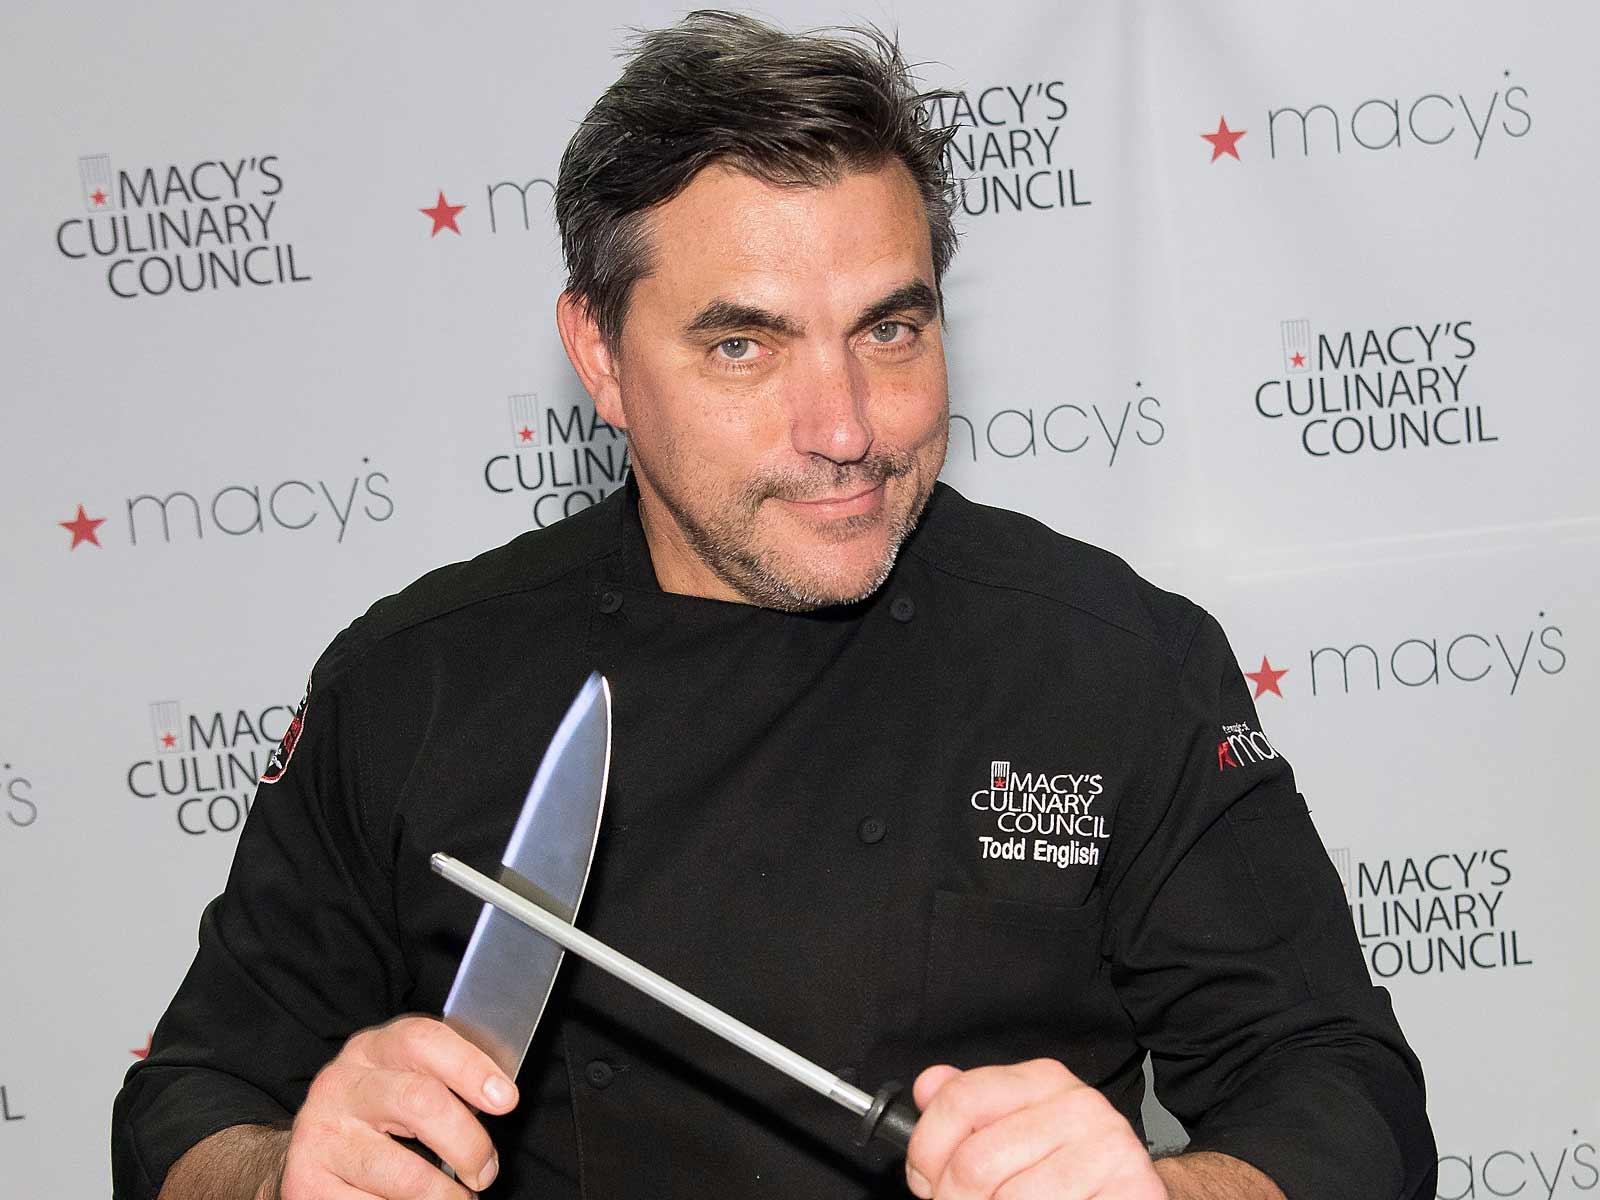 Chef Todd English Sues Housewares Co. After They Tried to Terminate Their Deal